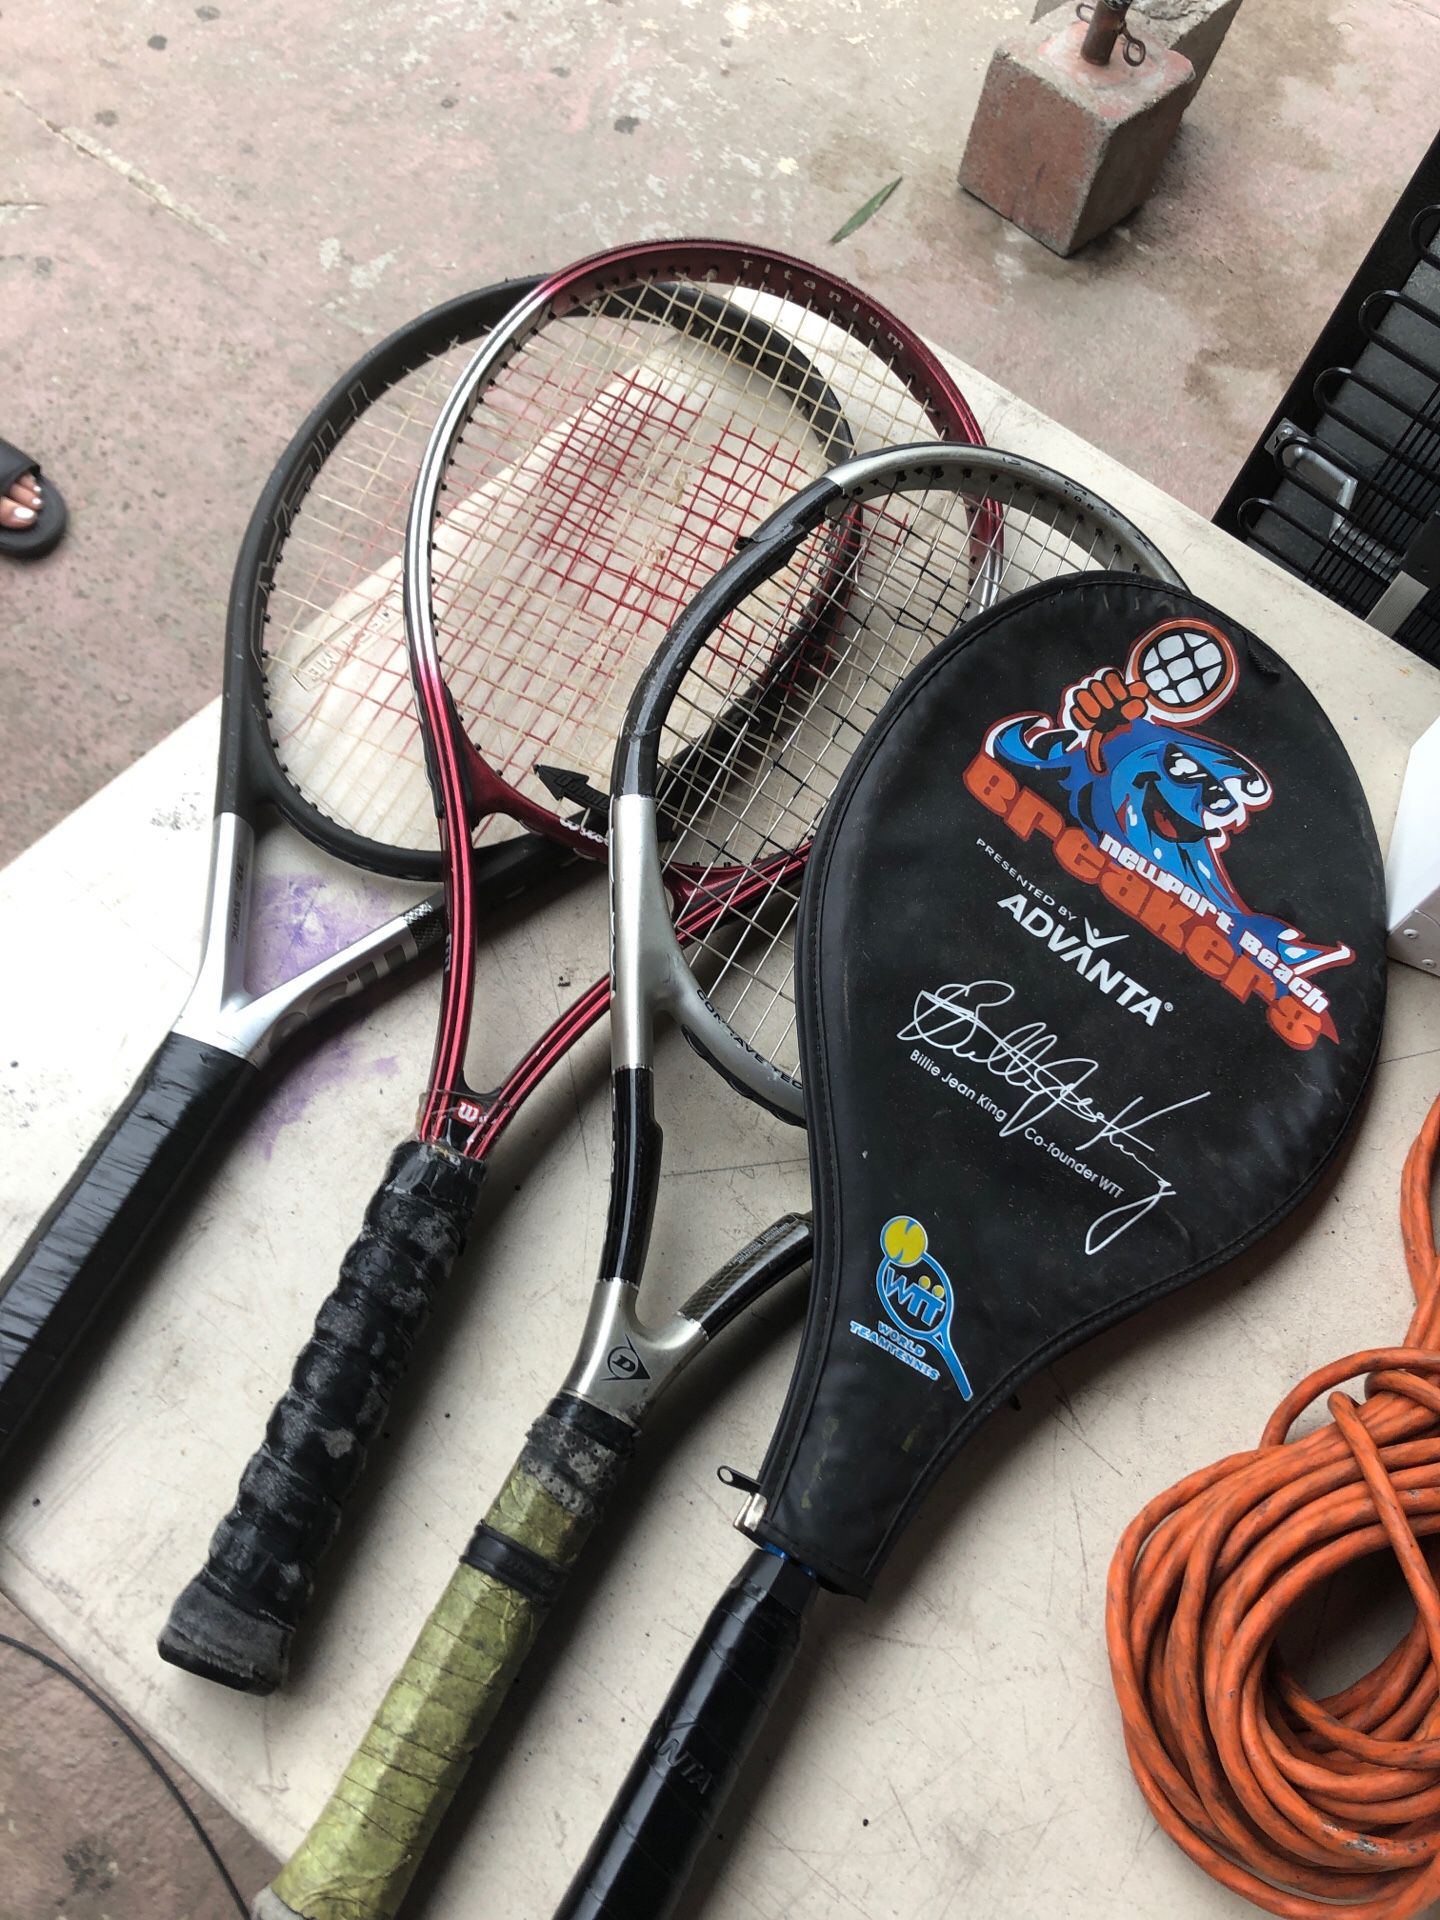 4 tennis rackets for ($10)